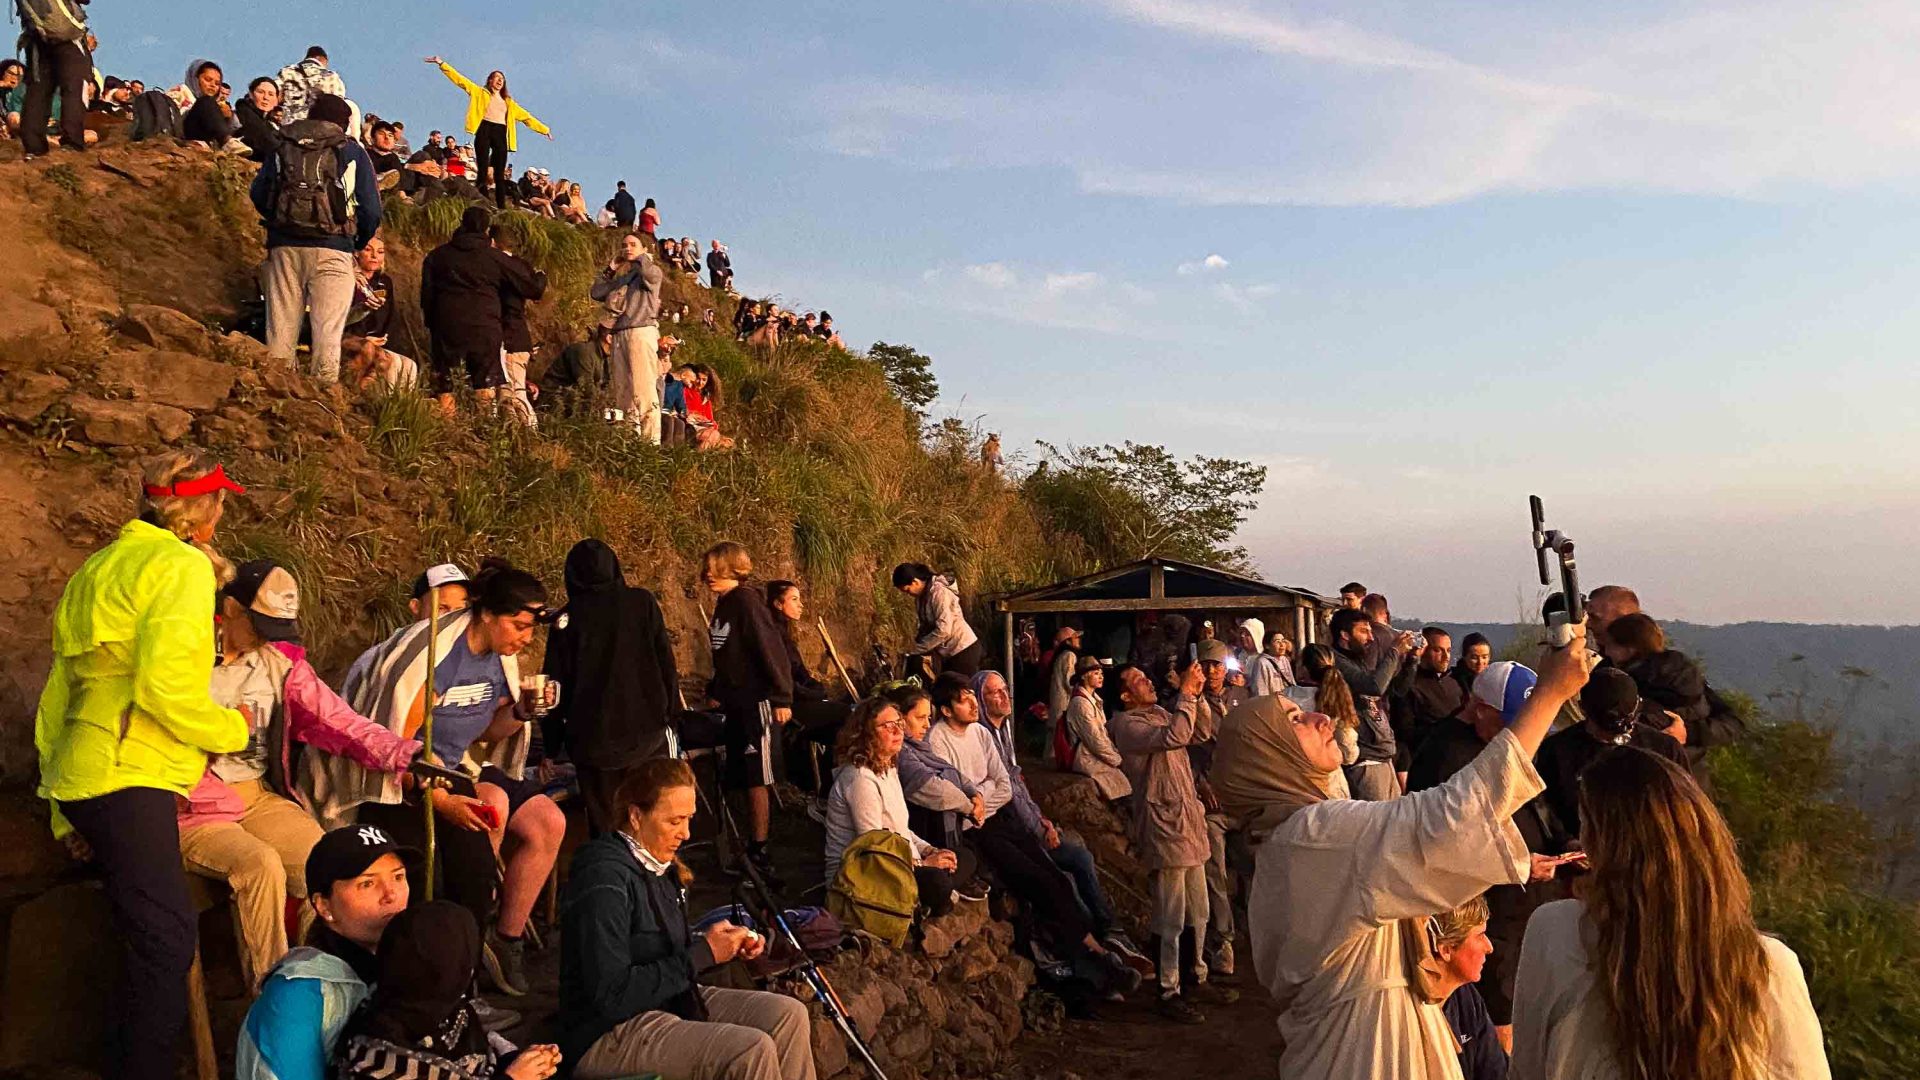 Hoards of tourists take photos of the sunrise over Mt Batur.